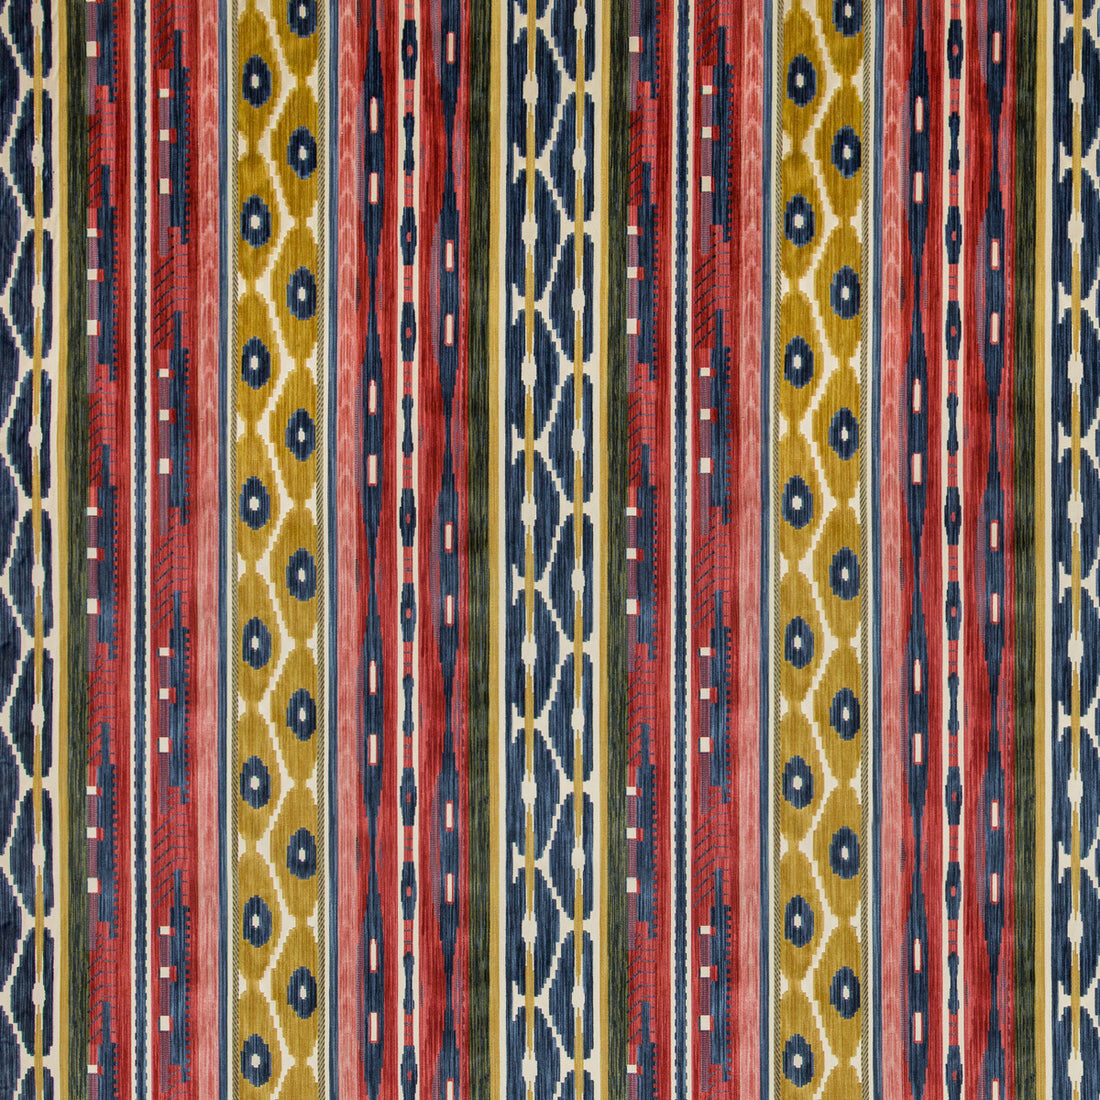 Desning Velvet fabric in red/blue color - pattern 2019117.195.0 - by Lee Jofa in the Harlington Velvets collection